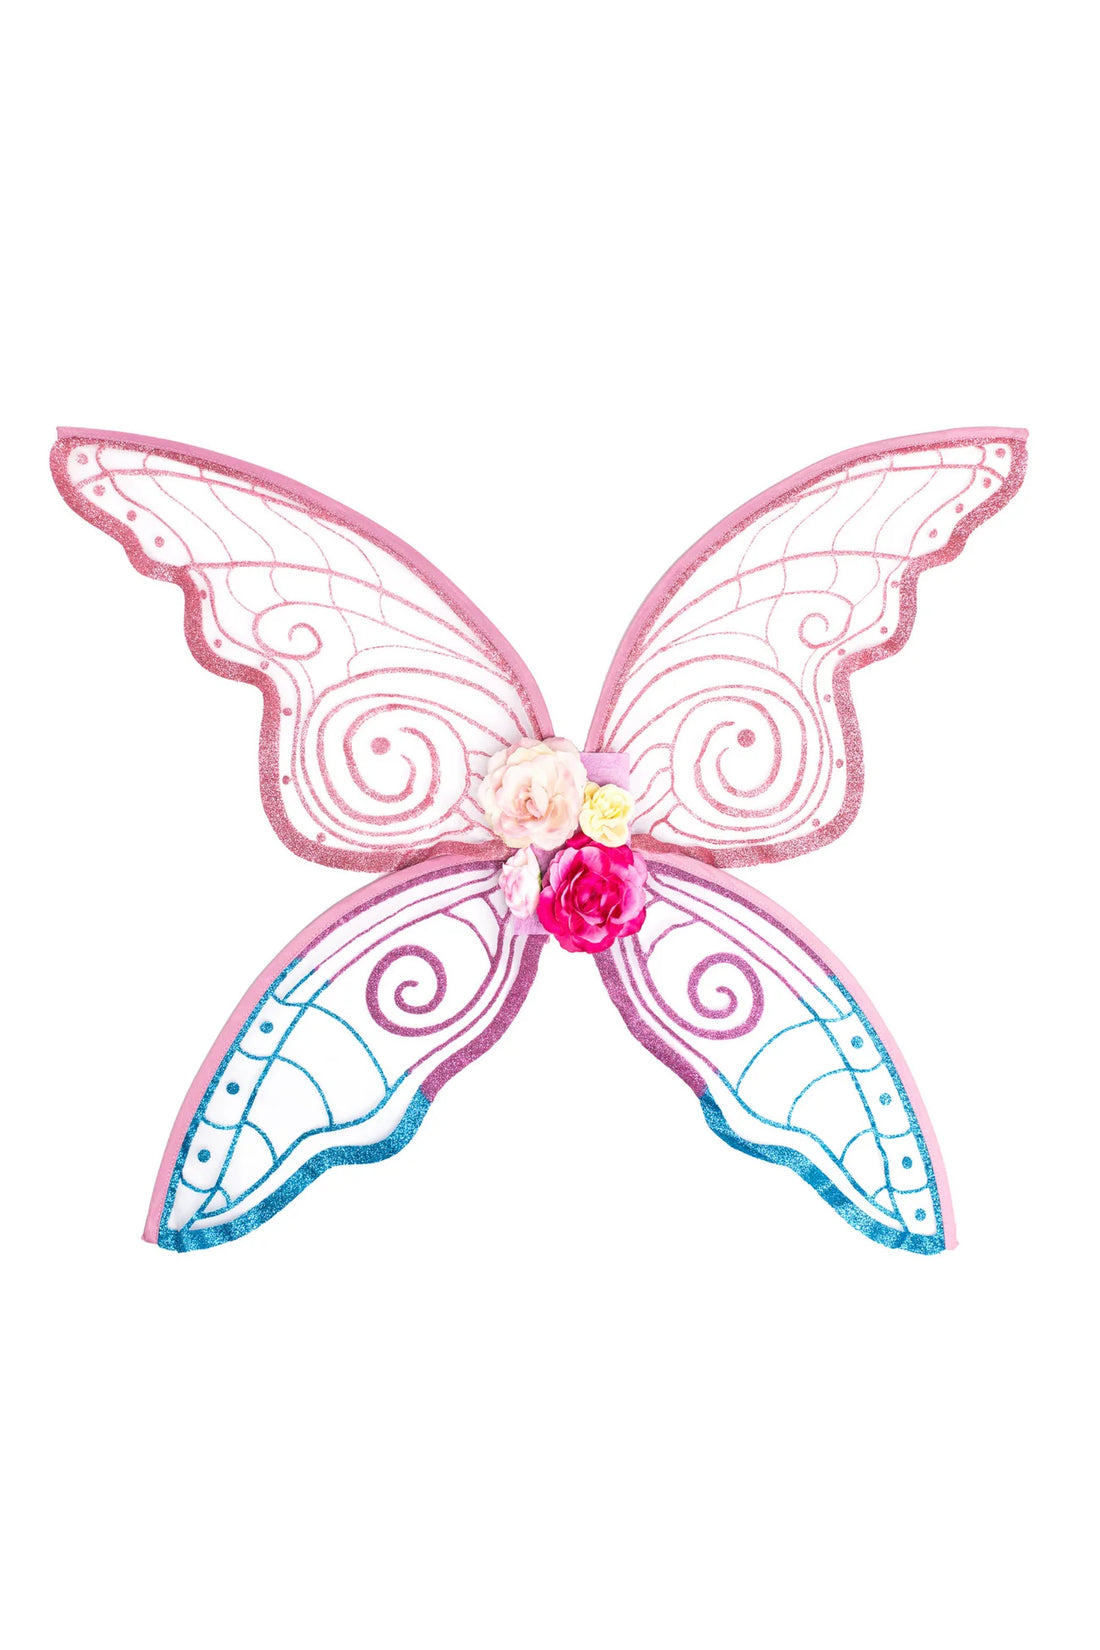 Pink & Blue Fairy Blossom Wings Preview #2